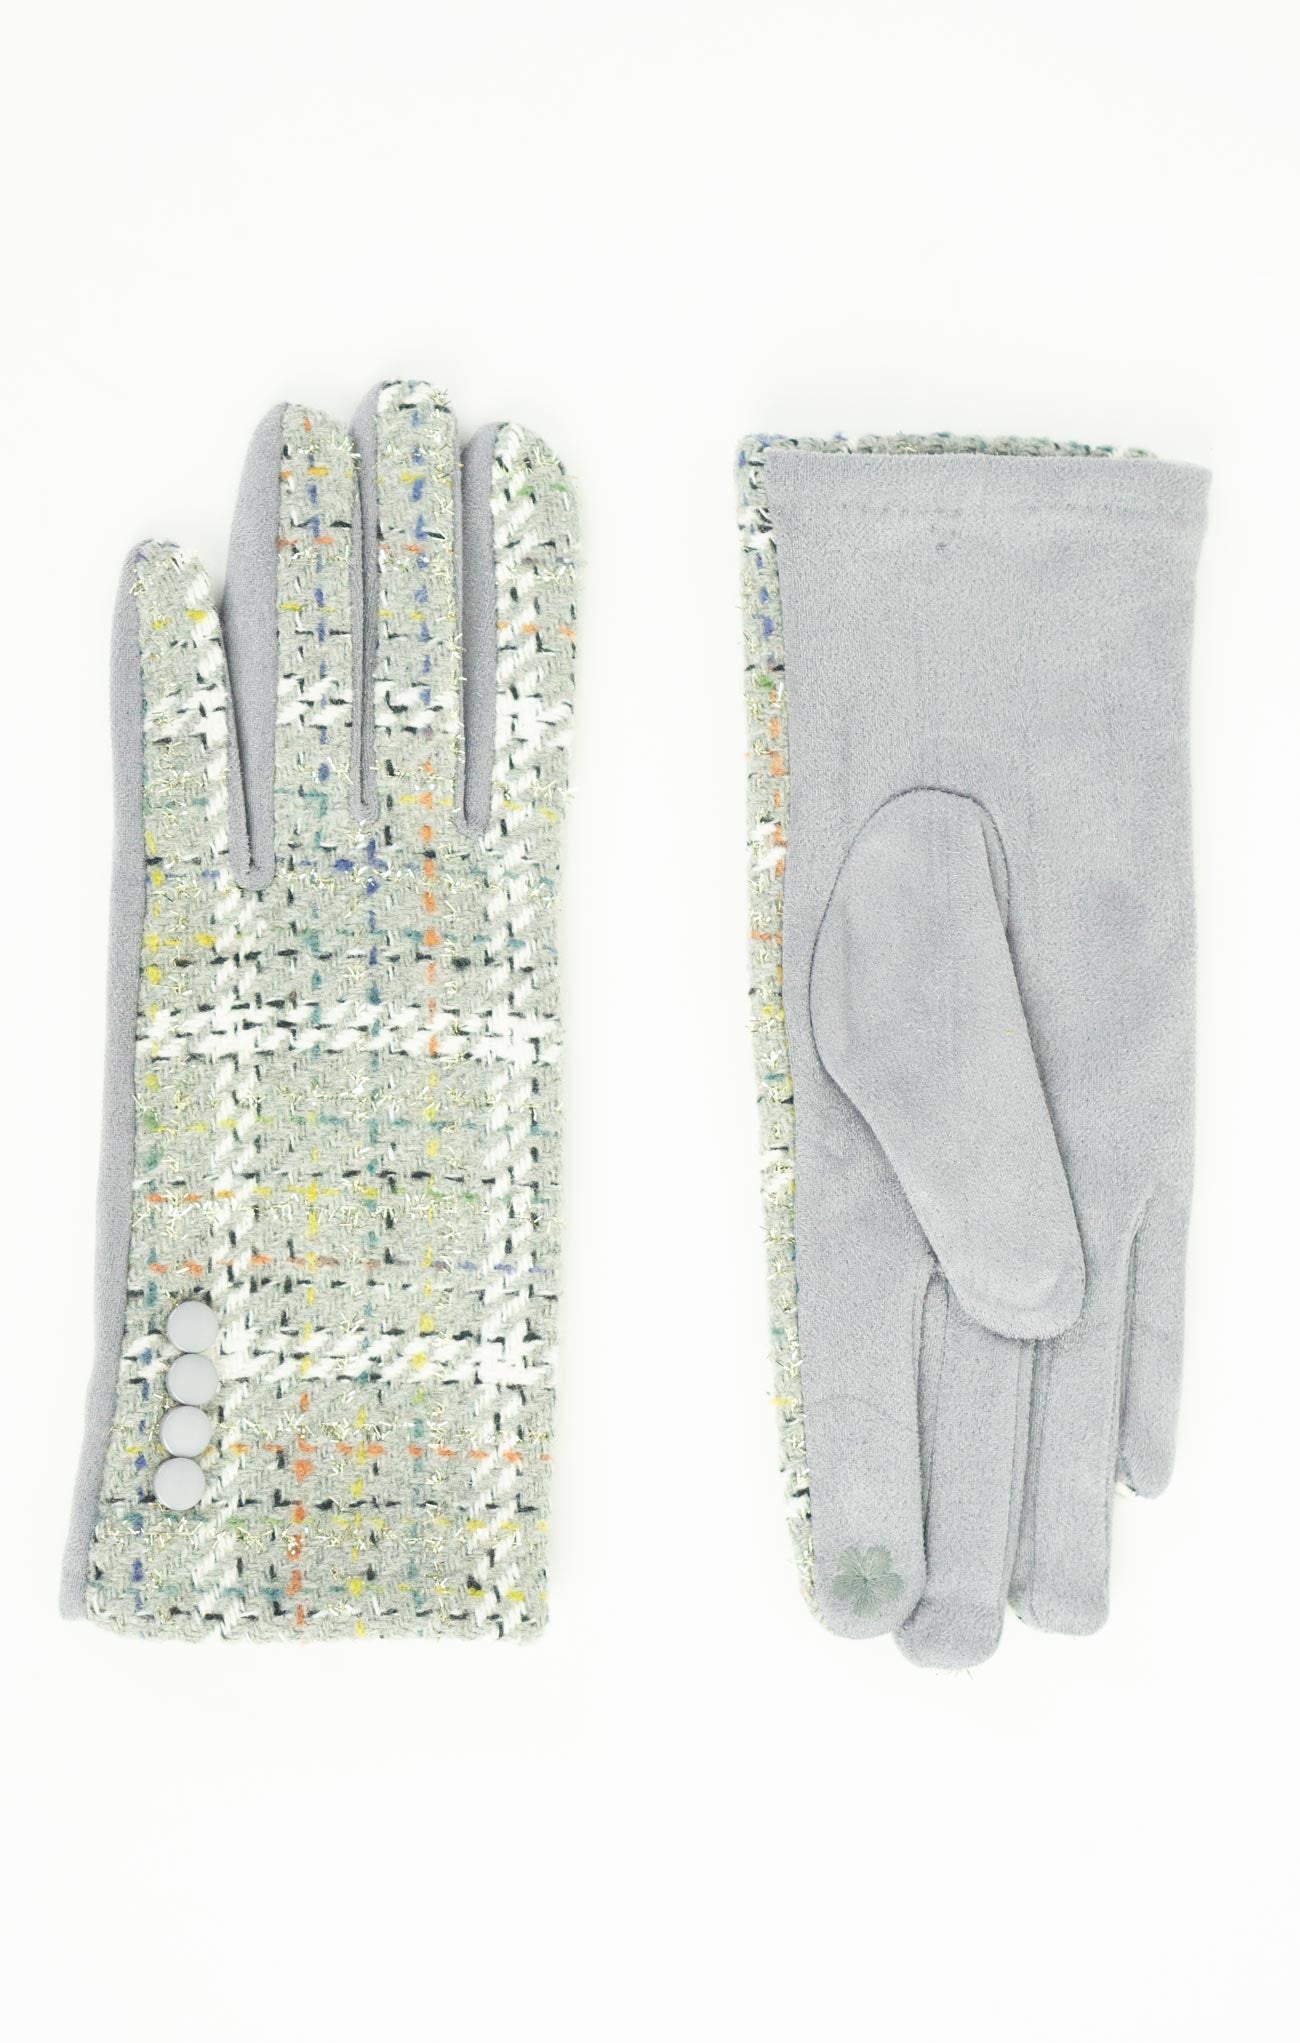 WOVEN TWEED GLOVES-grey,tweed and plaid pattern,four faux buttons,multi color stitching